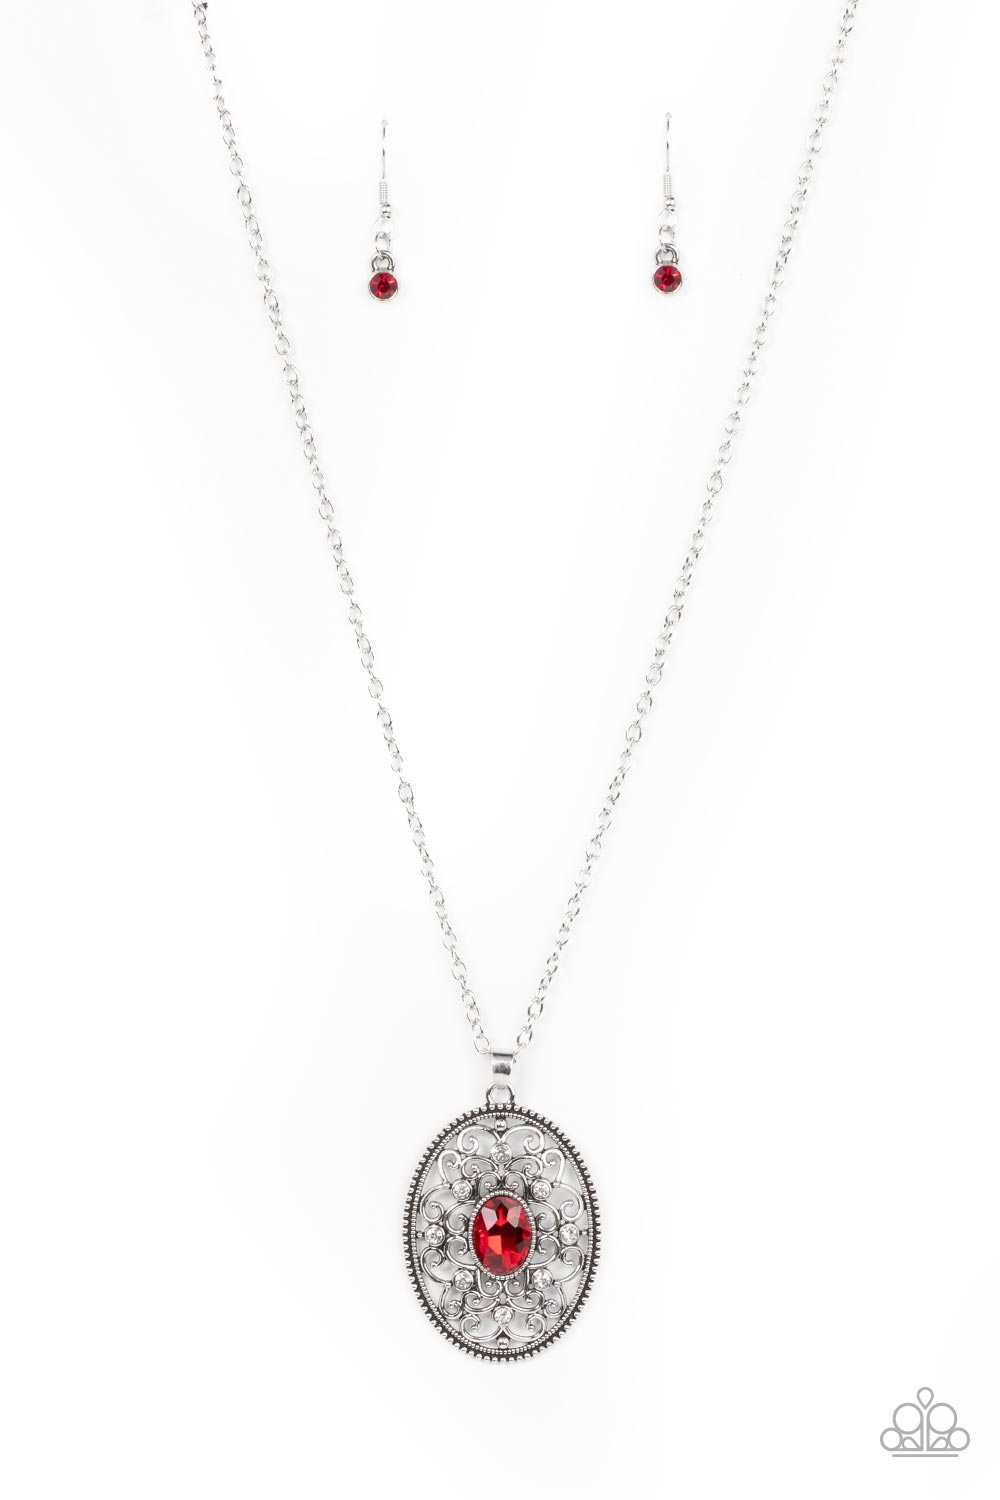 Sonata Swing - Red Item #P2RE-RDXX-234XX Dainty white rhinestones are sprinkled across silver vine-like filigree that whirls around an oval red gem center inside of a studded silver frame, resulting in a whimsical pendant at the bottom of a silver chain. Features an adjustable clasp closure.  Sold as one individual necklace. Includes one pair of matching earrings.